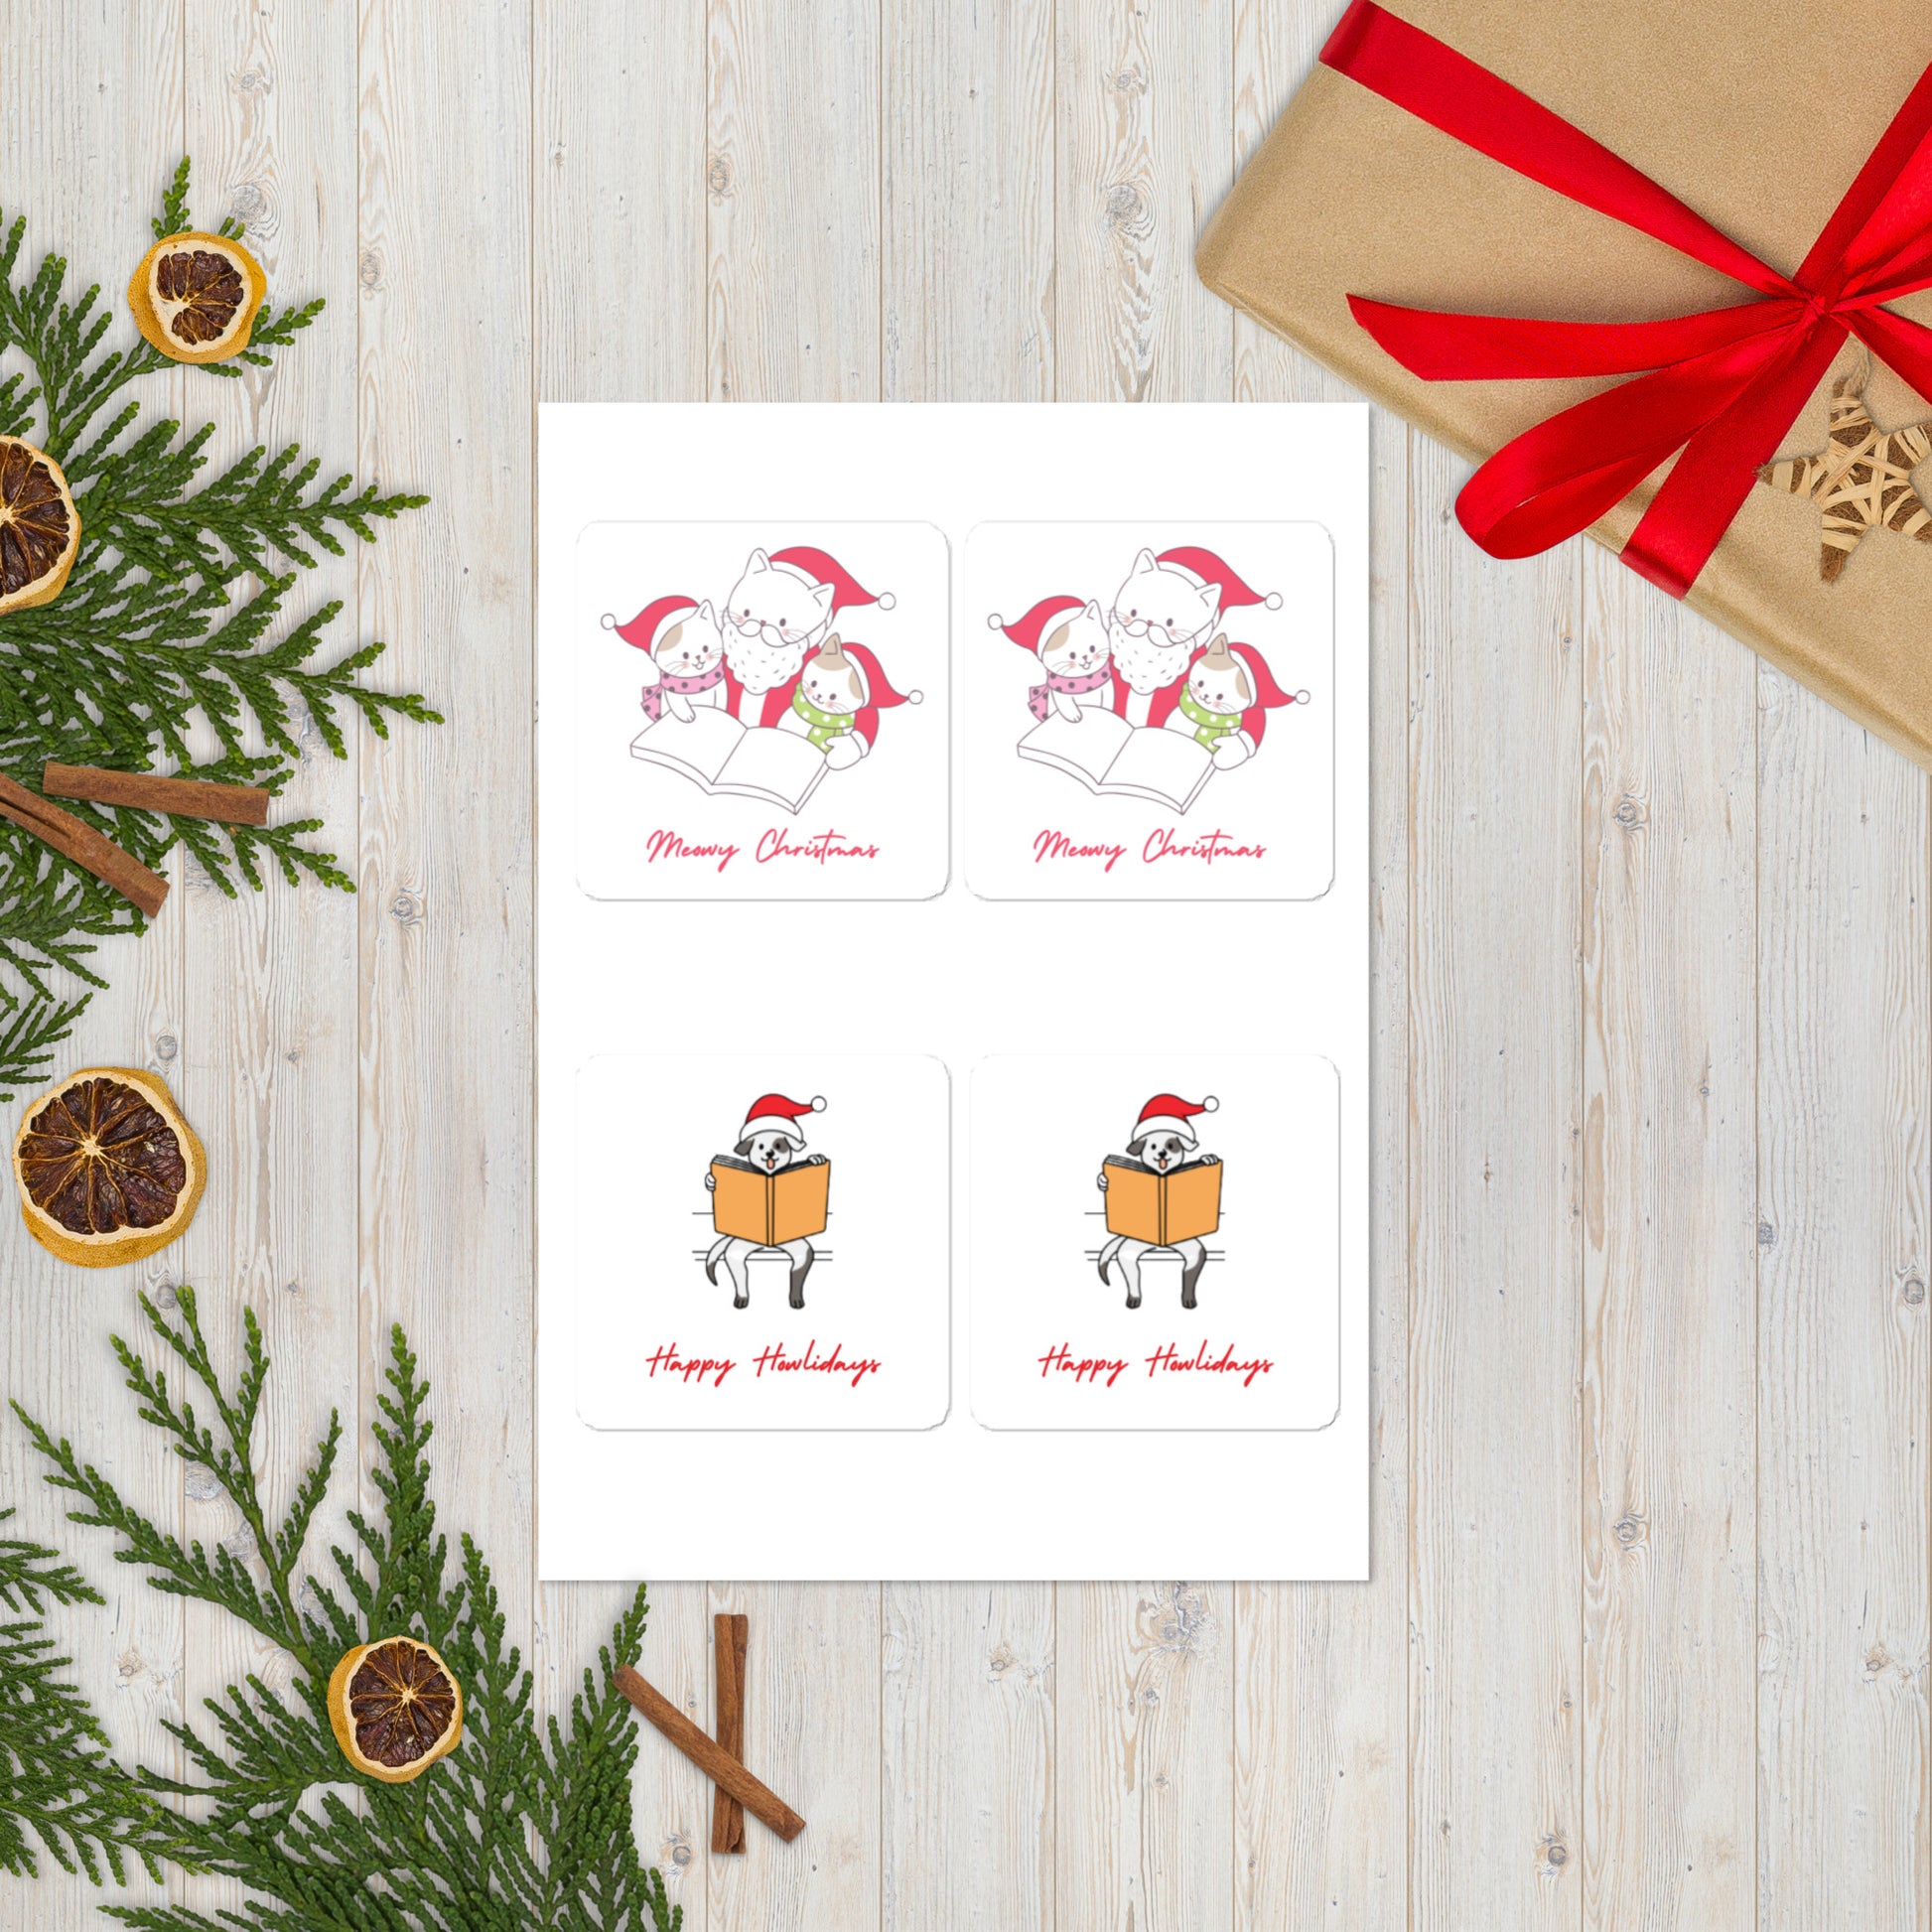 Holiday Animal Sticker Sheet - The Spinster Librarian Shop